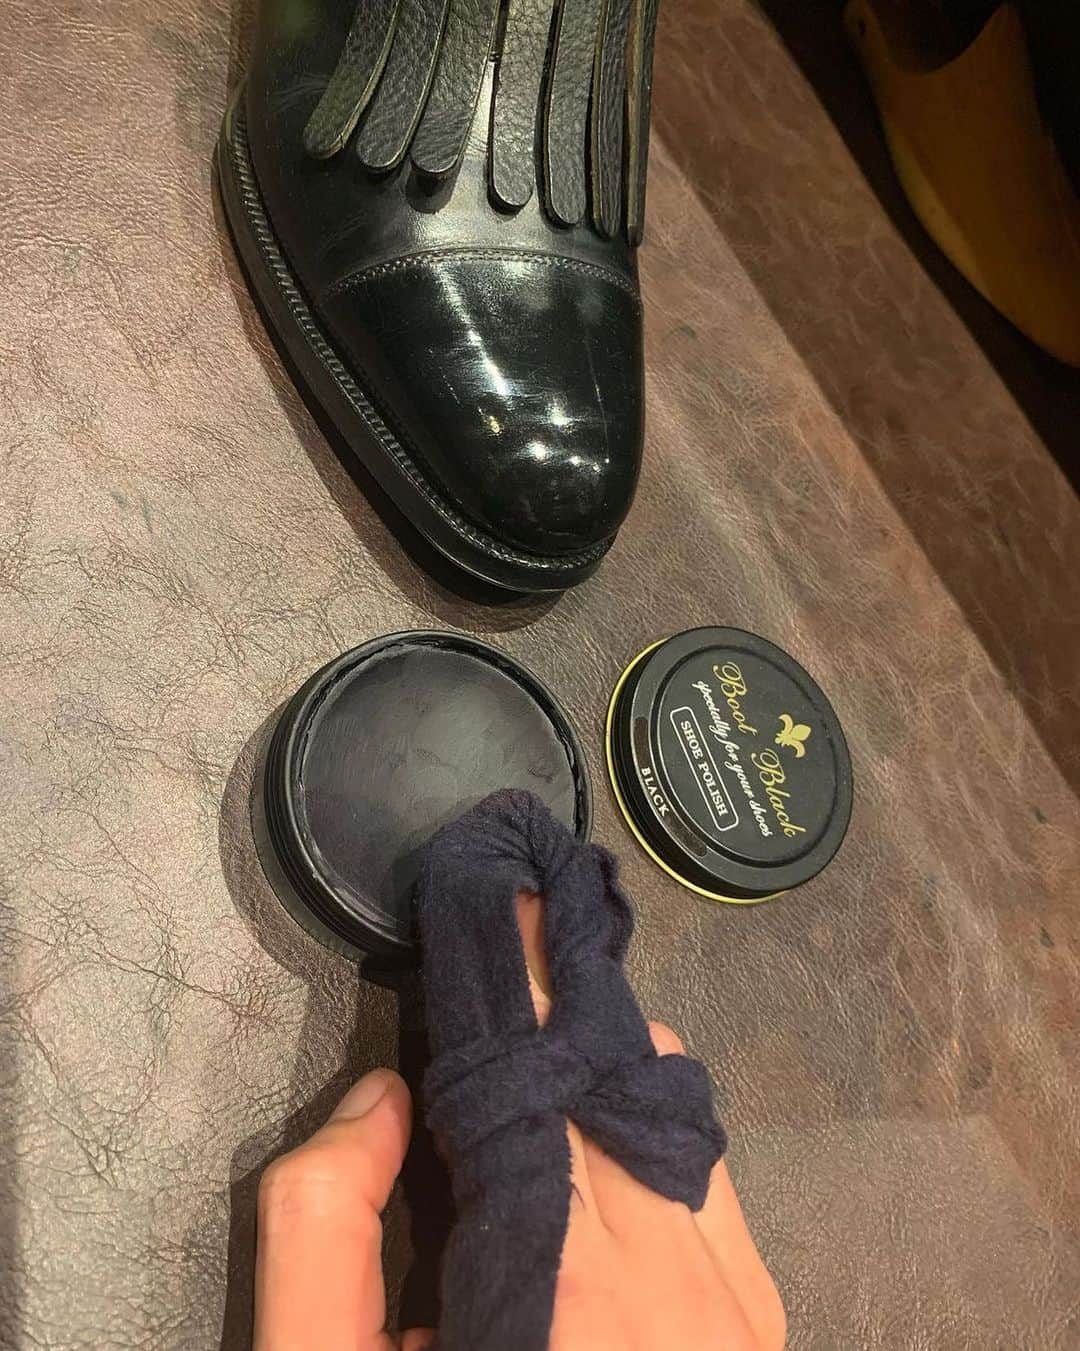 bootblack_officialのインスタグラム：「Boot Black Shoe Polish ⚜️ An oil based polish for when you want to add luster. Creates robust water repelling on the leather surface.  Photo by : @theglacagebyresh 🇹🇭  #bootblackshoeshine#bootblackshoecare#highshine#shoecare#shoeshine#shoepolish#shoegazing#shoestagram#leathershoes#madeinjapan#japanmade#japan#bangkok#thailand#classicshoes#dressshoes#shoegram#mirrorshine#shoeaddiction#shoeaddict」